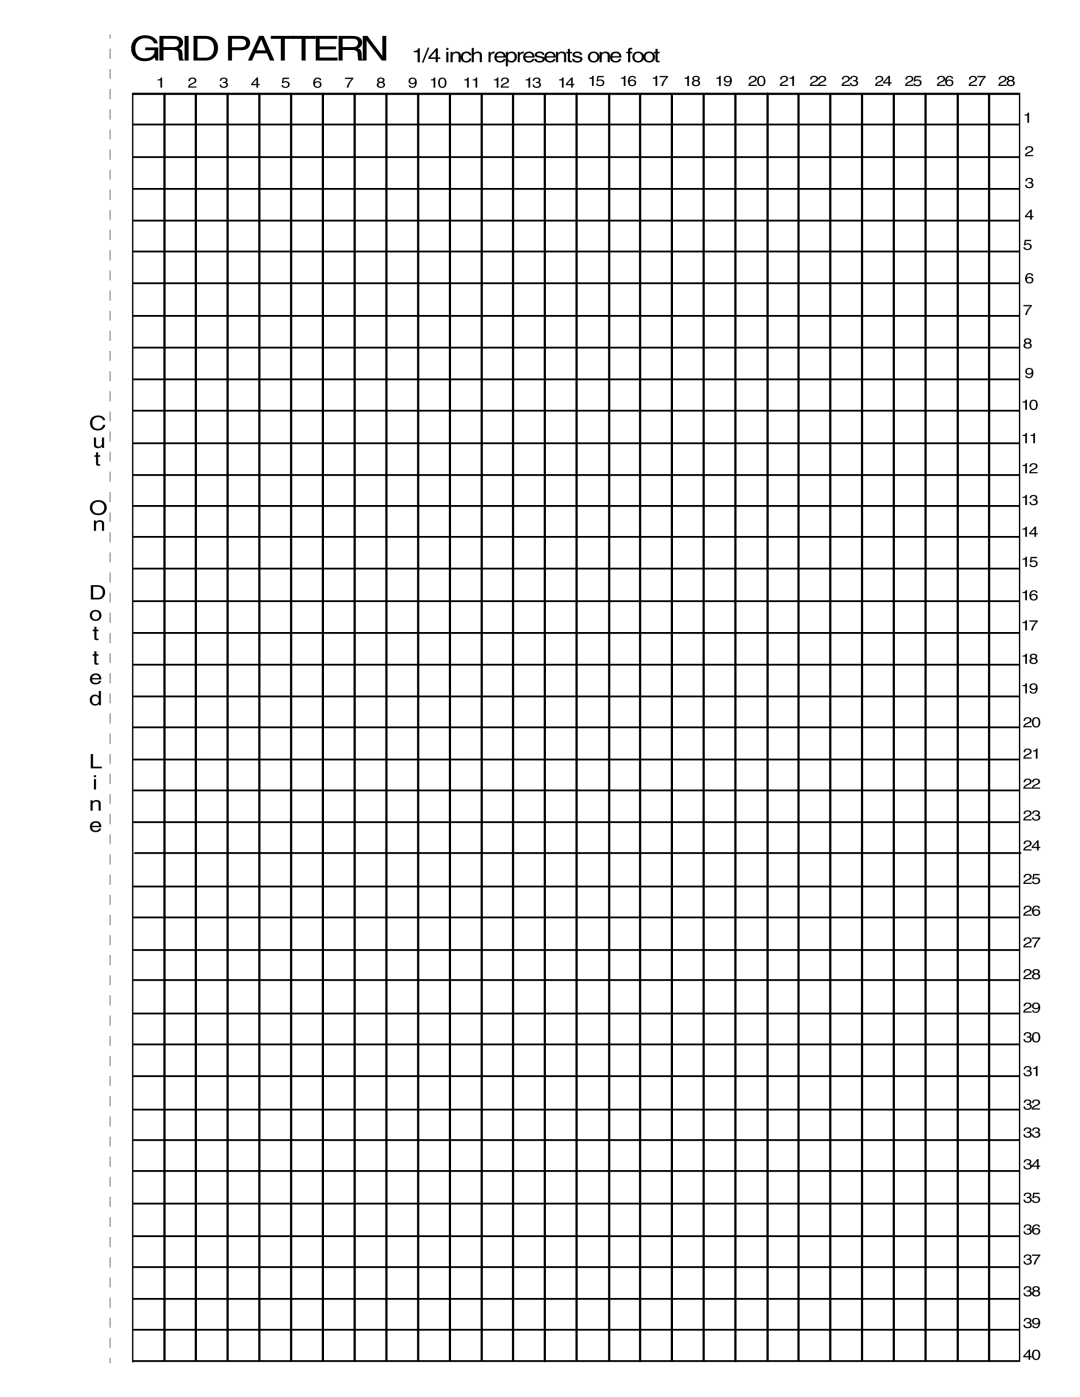 Xerox 180 IPS manual C u t O n D o t t e d L i n e, GRID PATTERN 1/4 inch represents one foot 